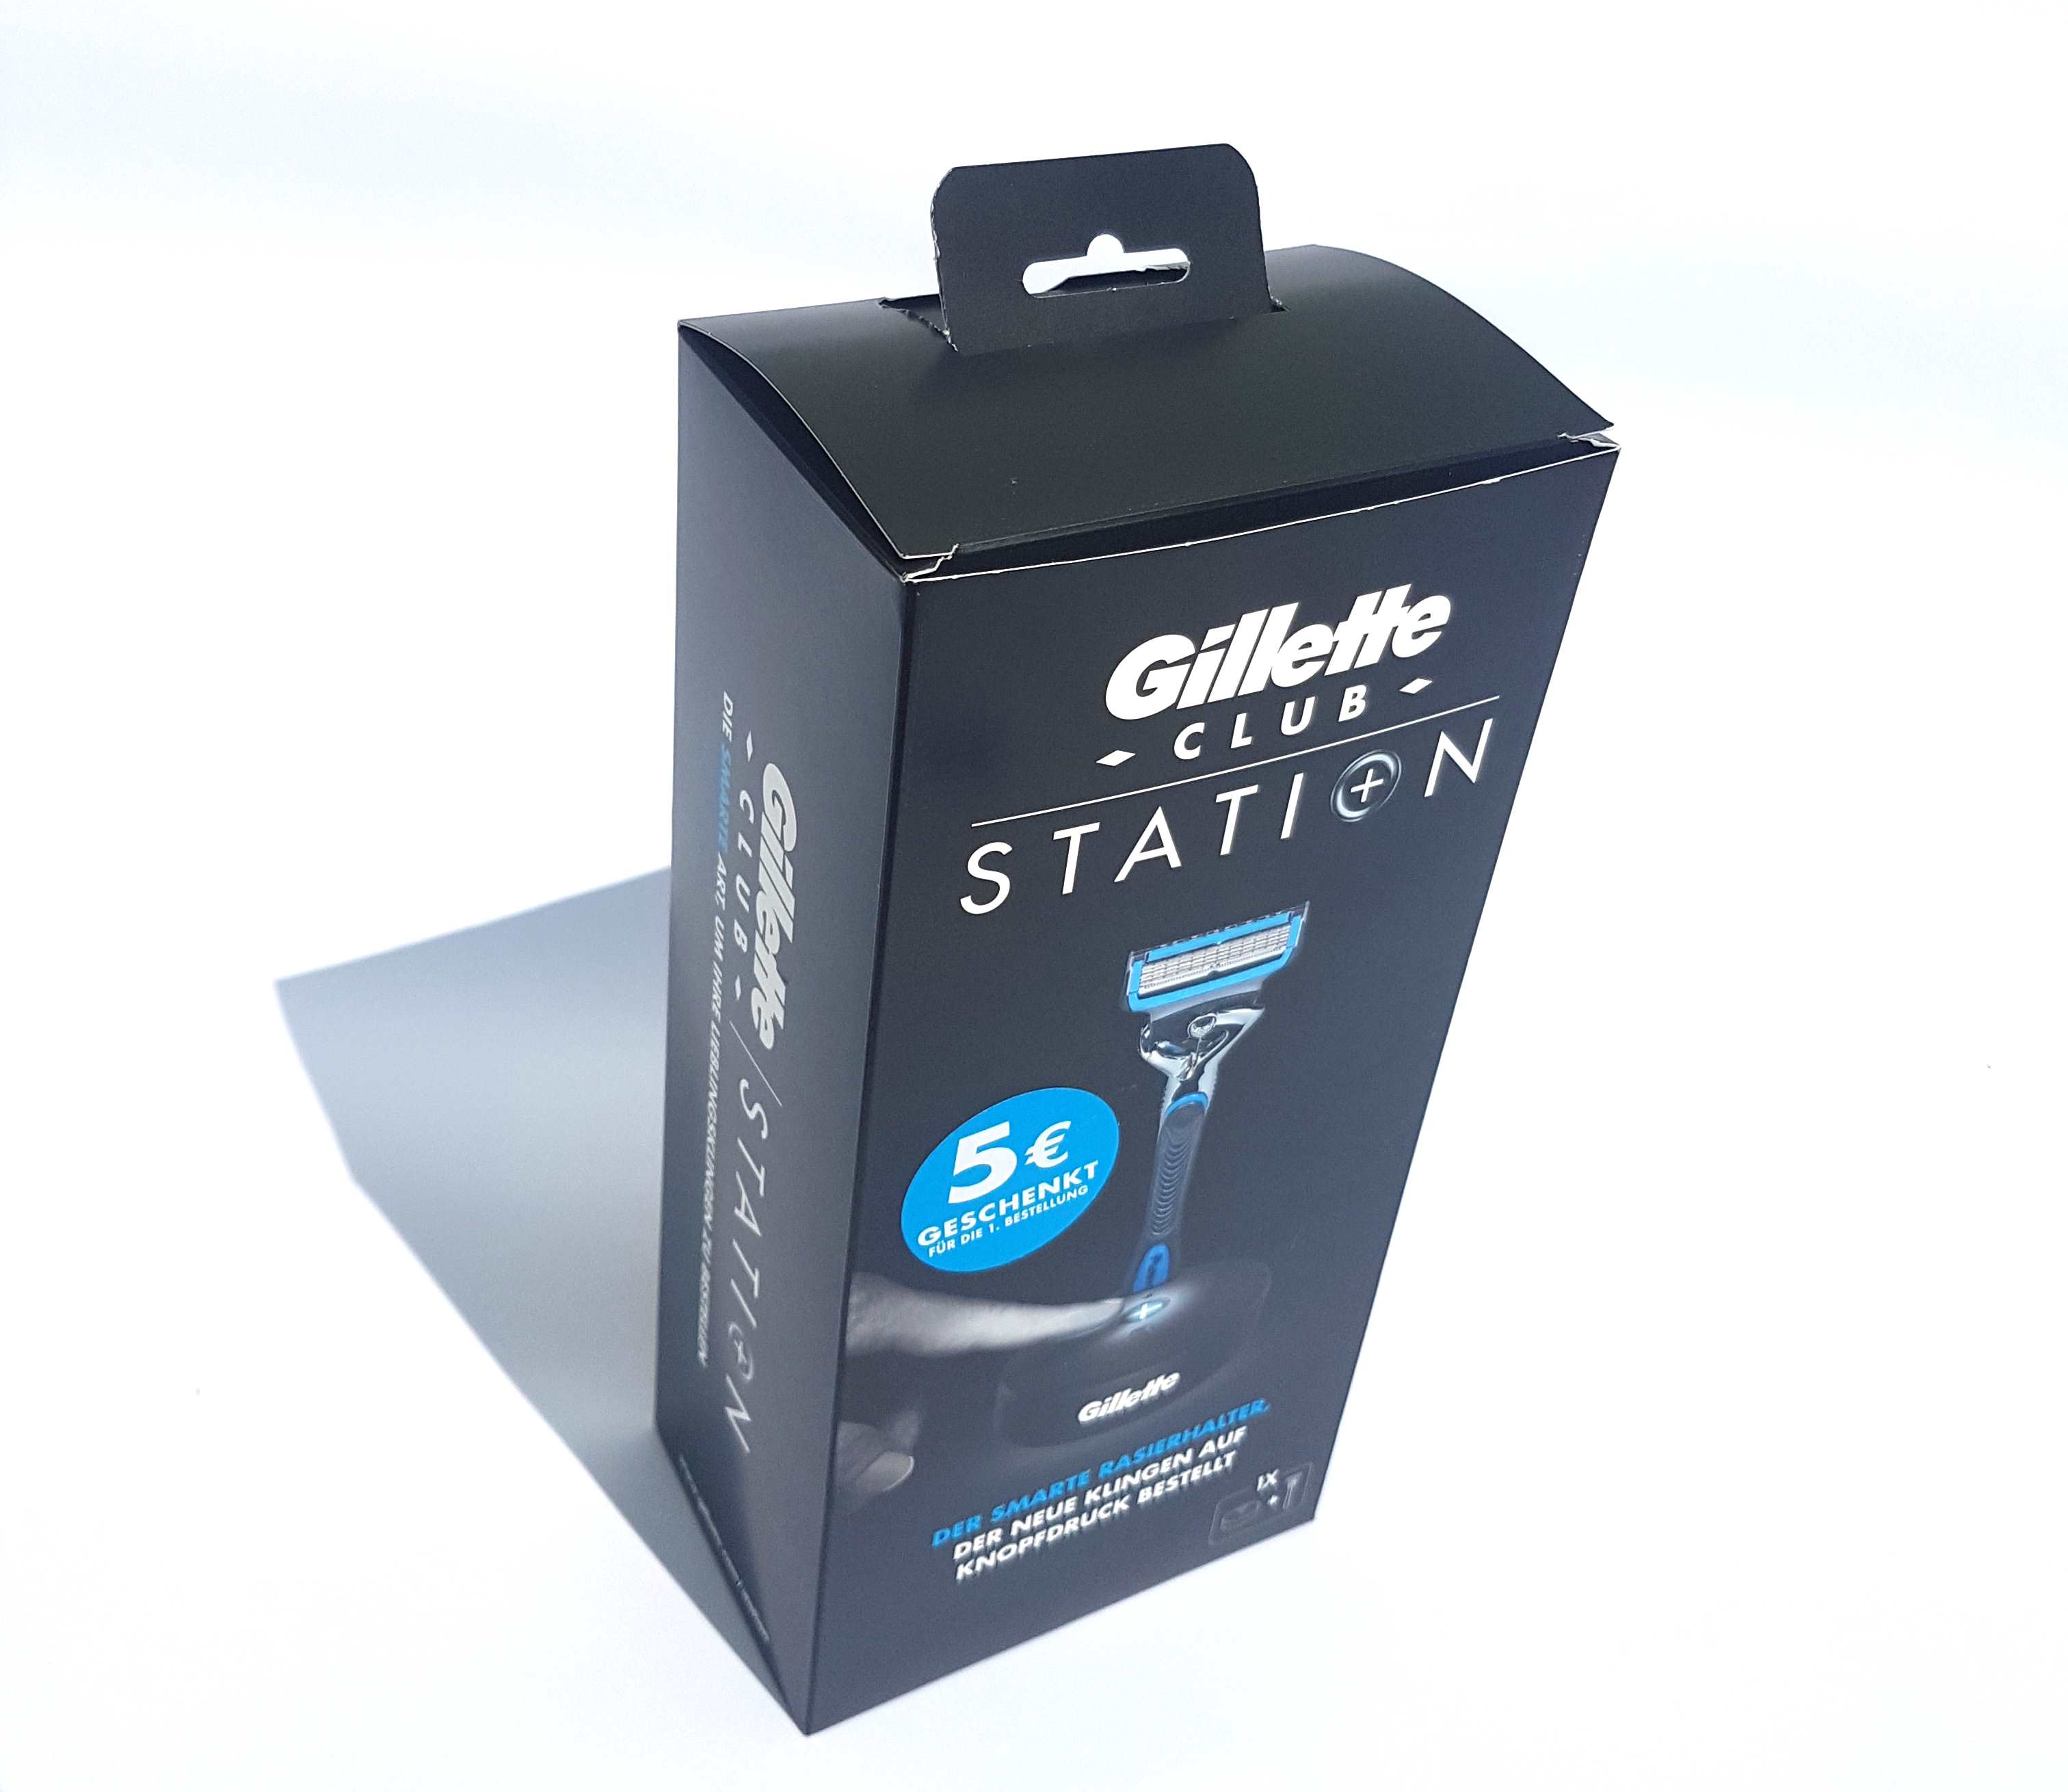 © Harald Naumann - Currently only available in Austria, Gillette offers its customers the capability to order new razor blades at the touch of a button.